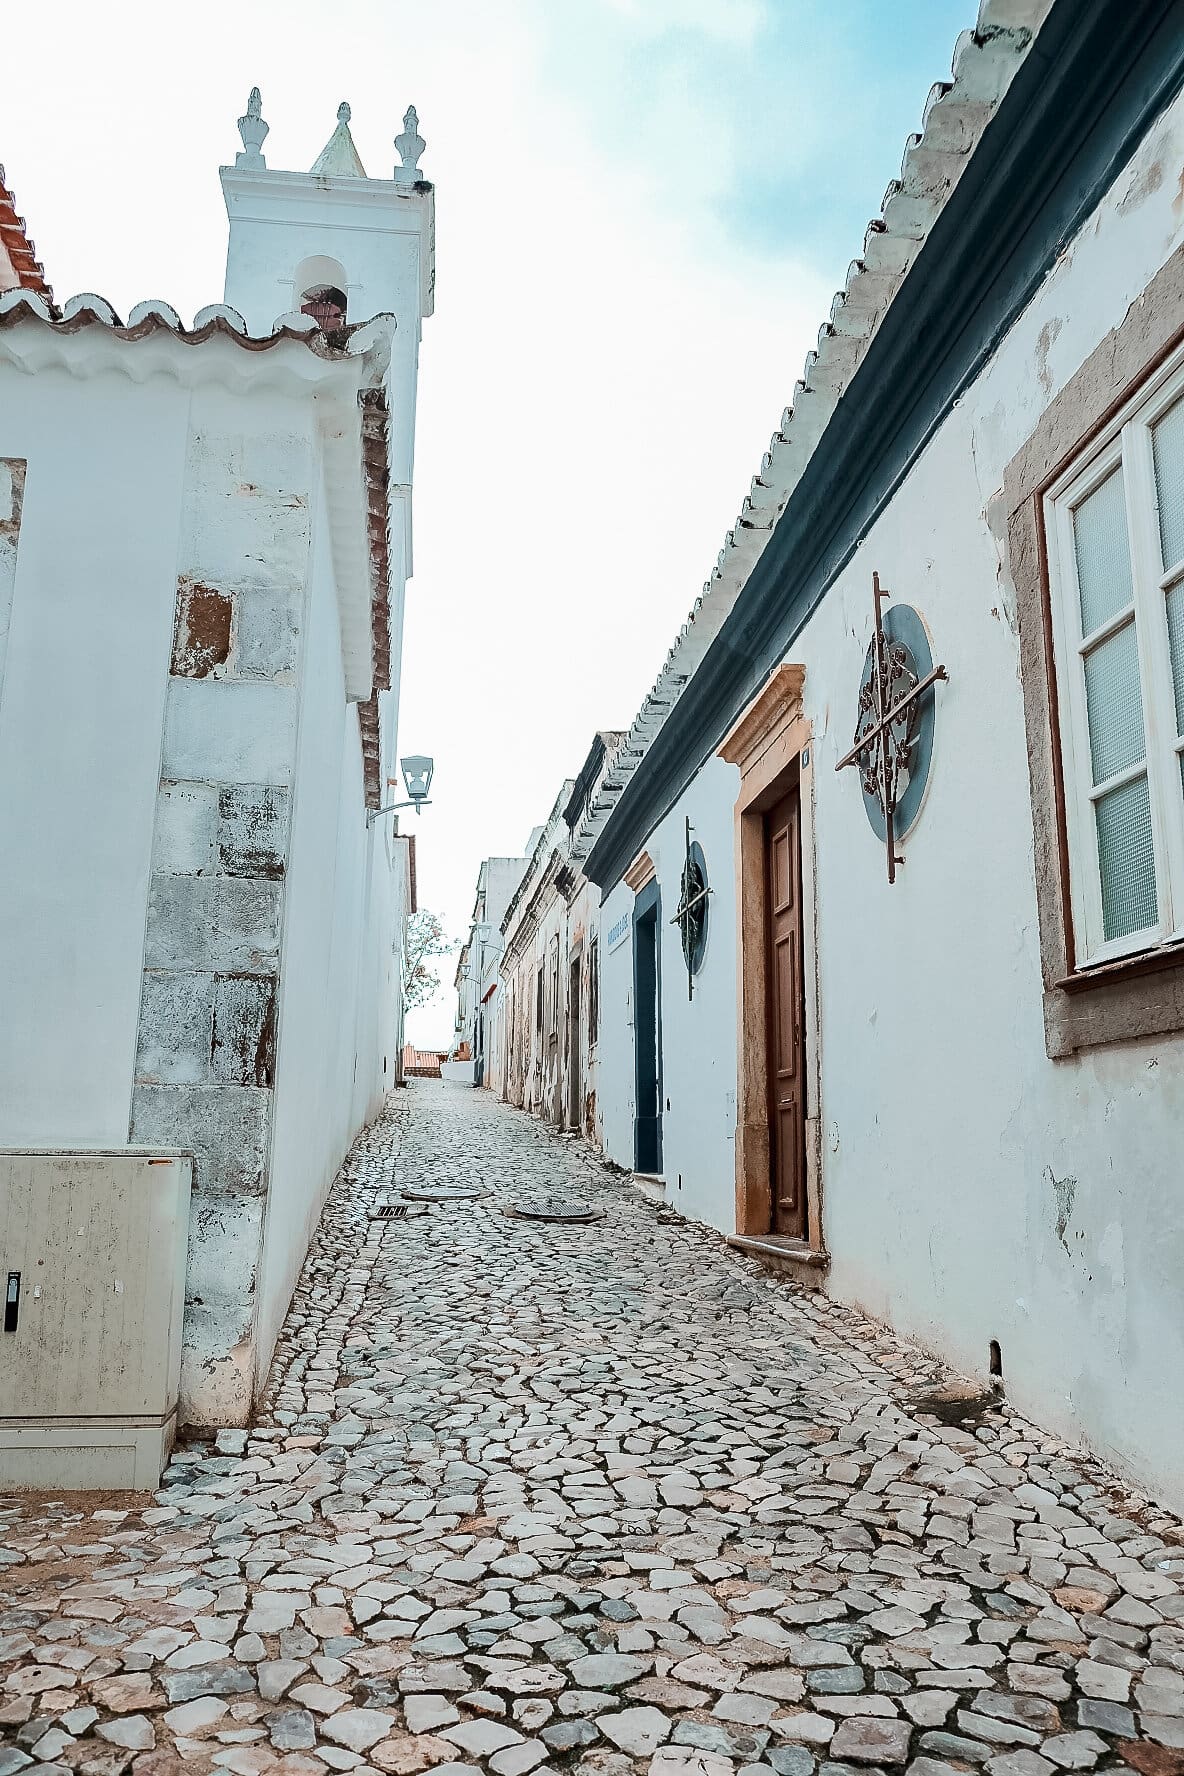 View of the cobblestone streets in Old Town Tavira